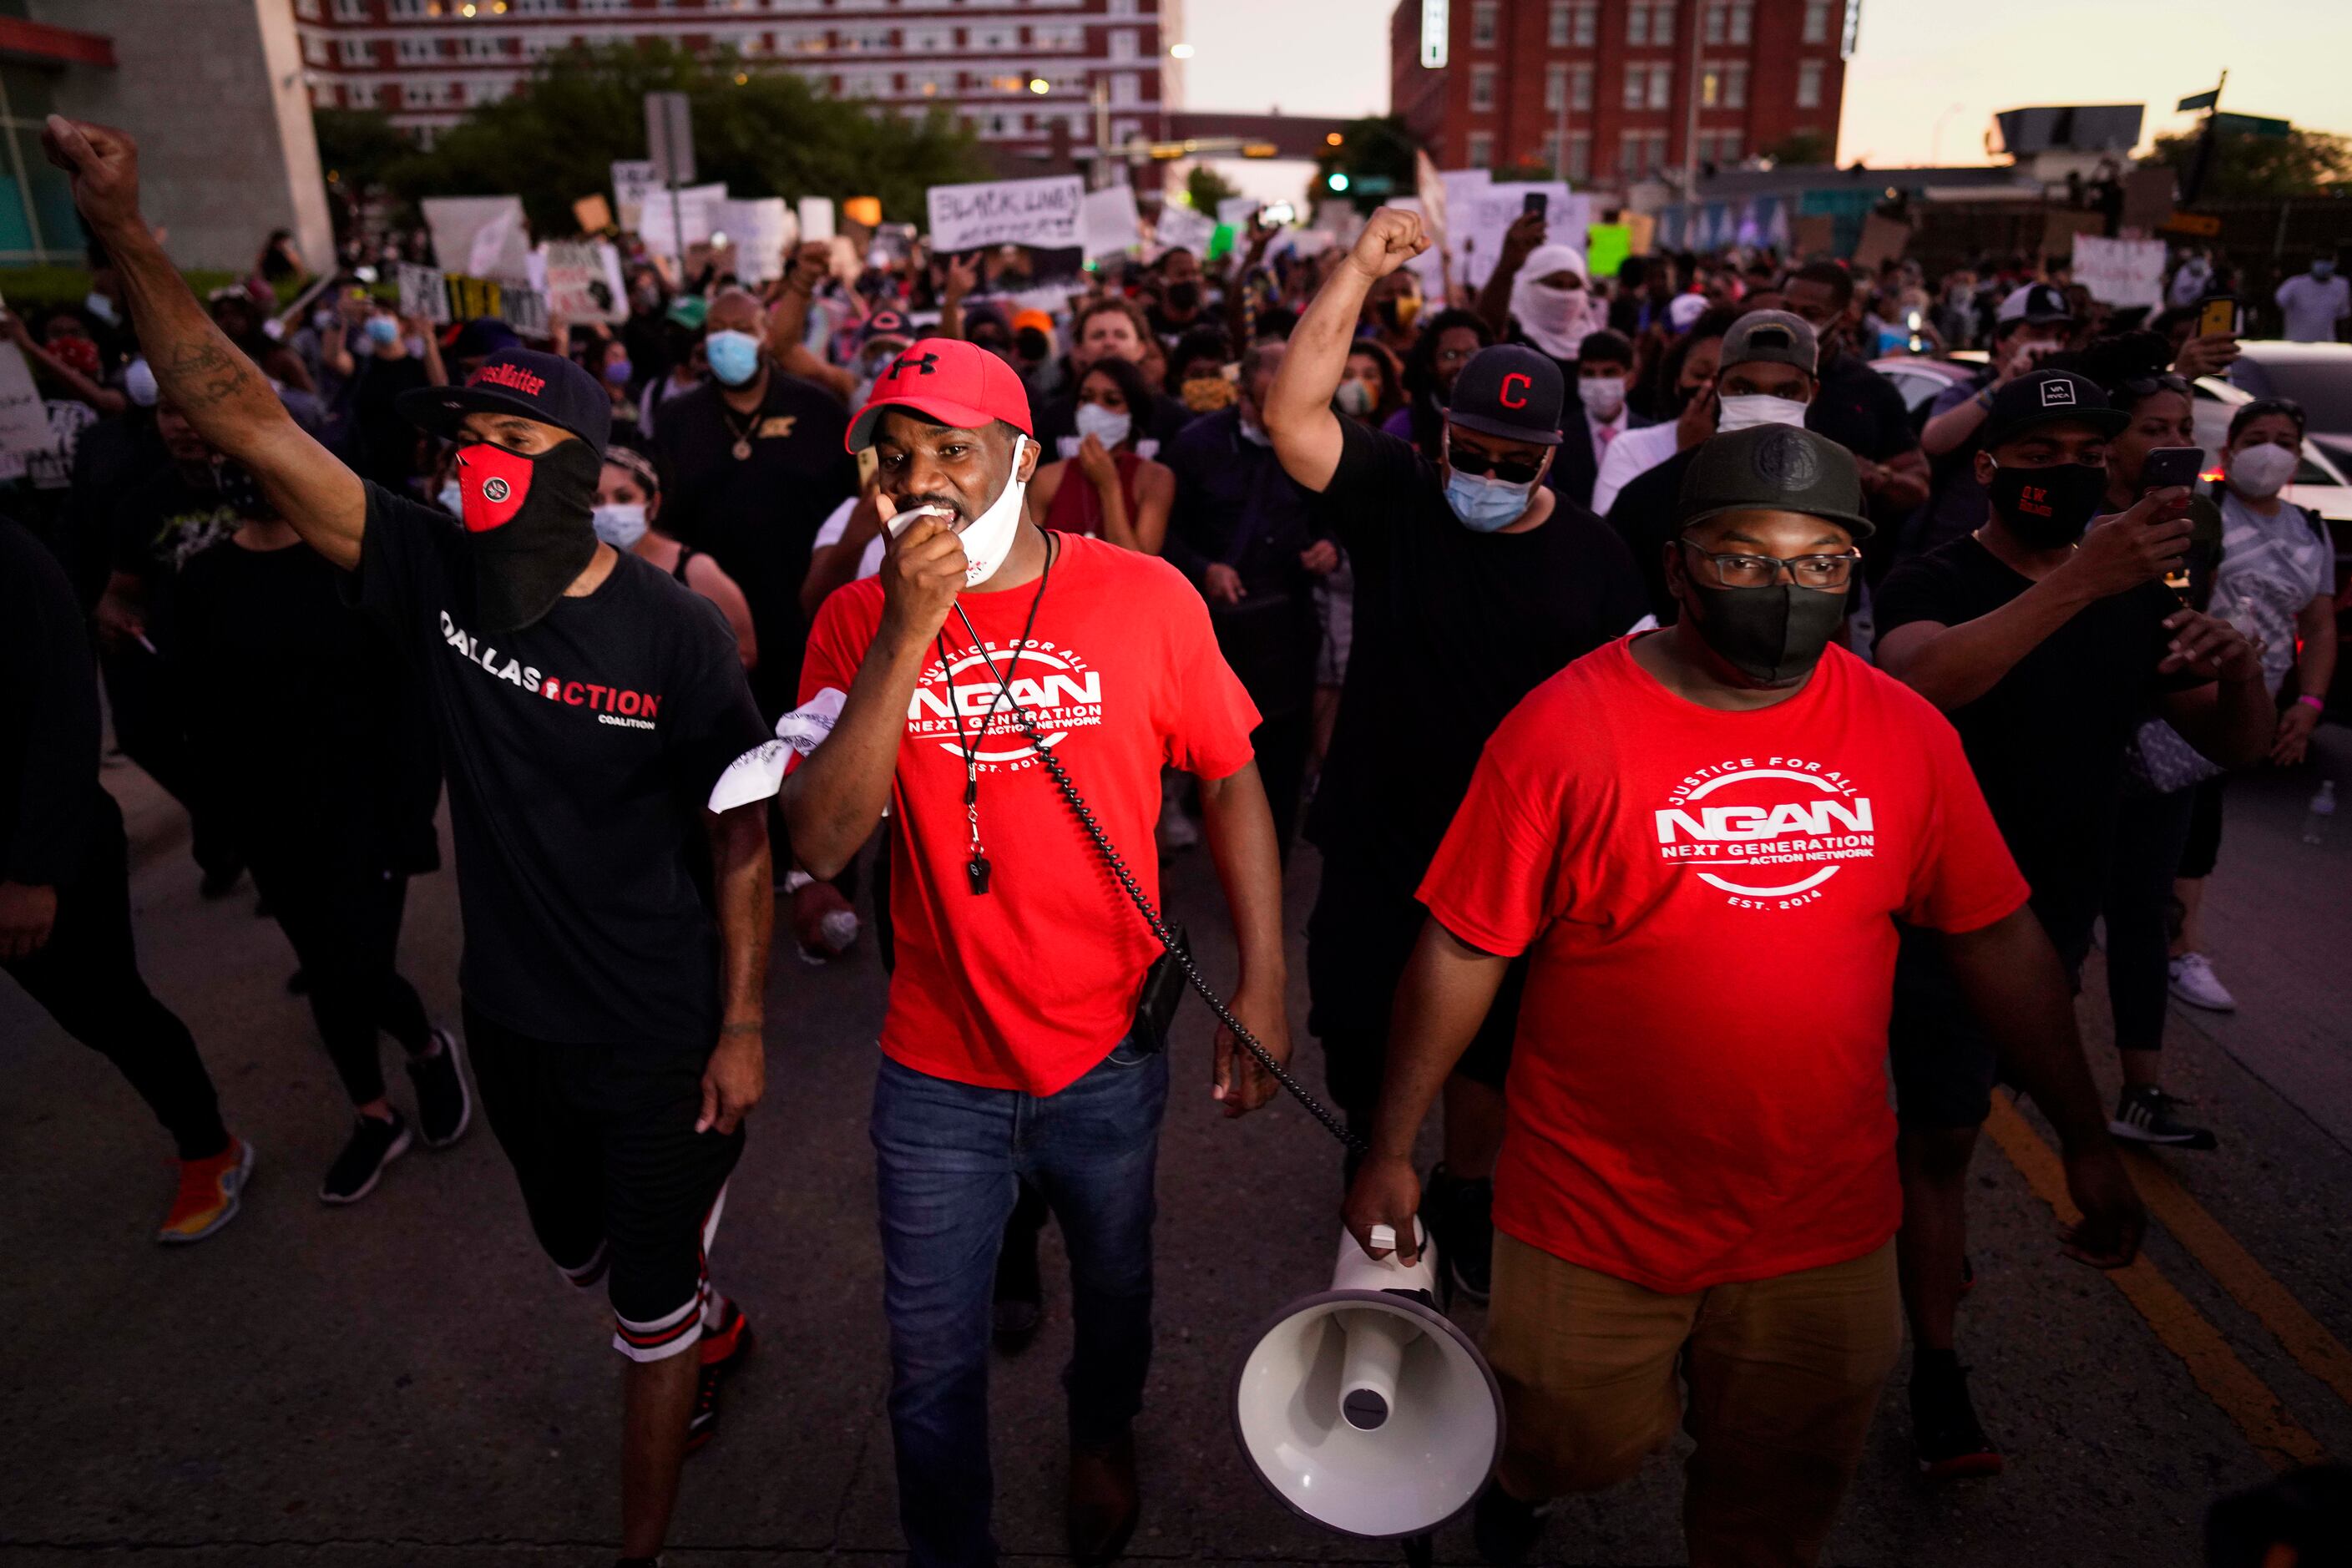 Dominique Alexander, the head of Next Generation Action Network, leads a march against...